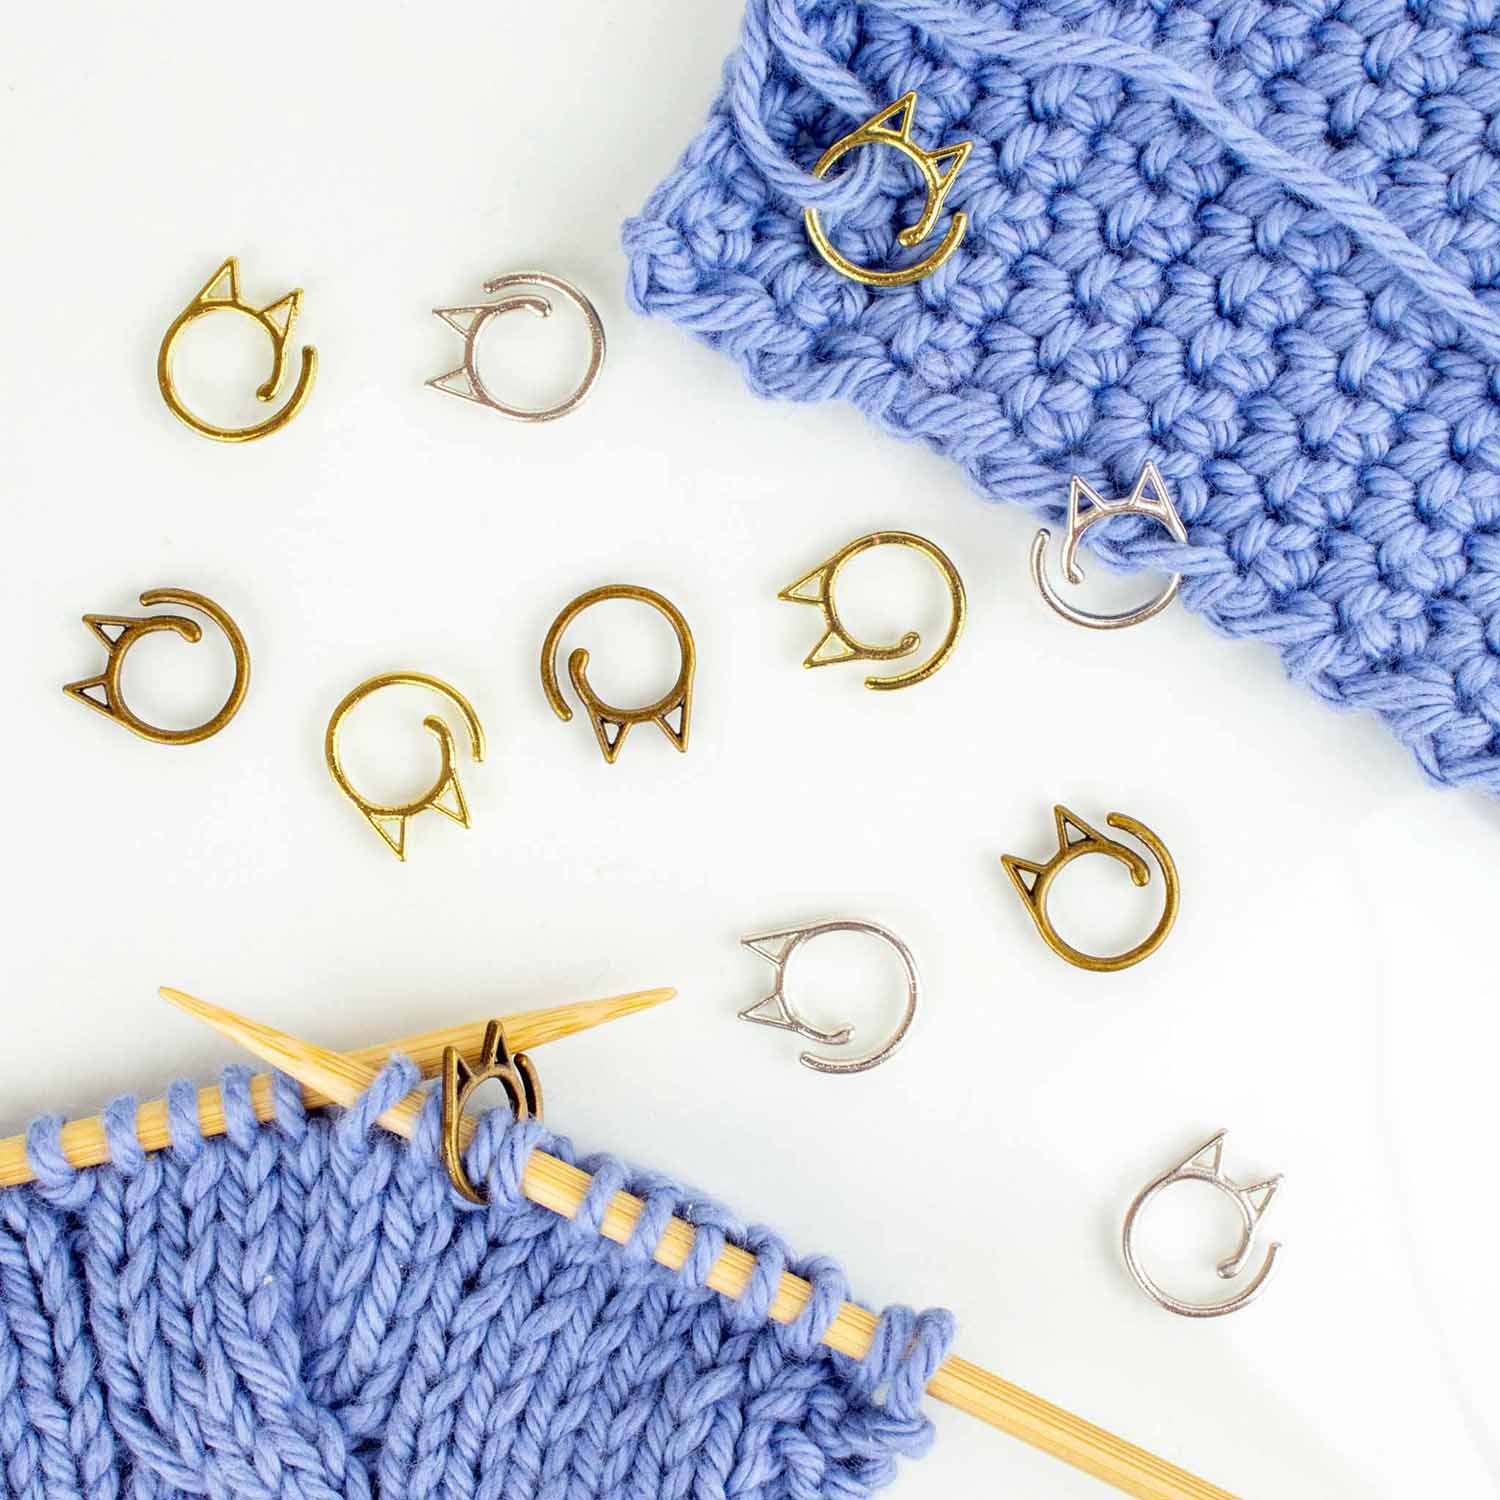 Knit Extension Cords - Stitch Holder Cords - Twice Sheared Sheep